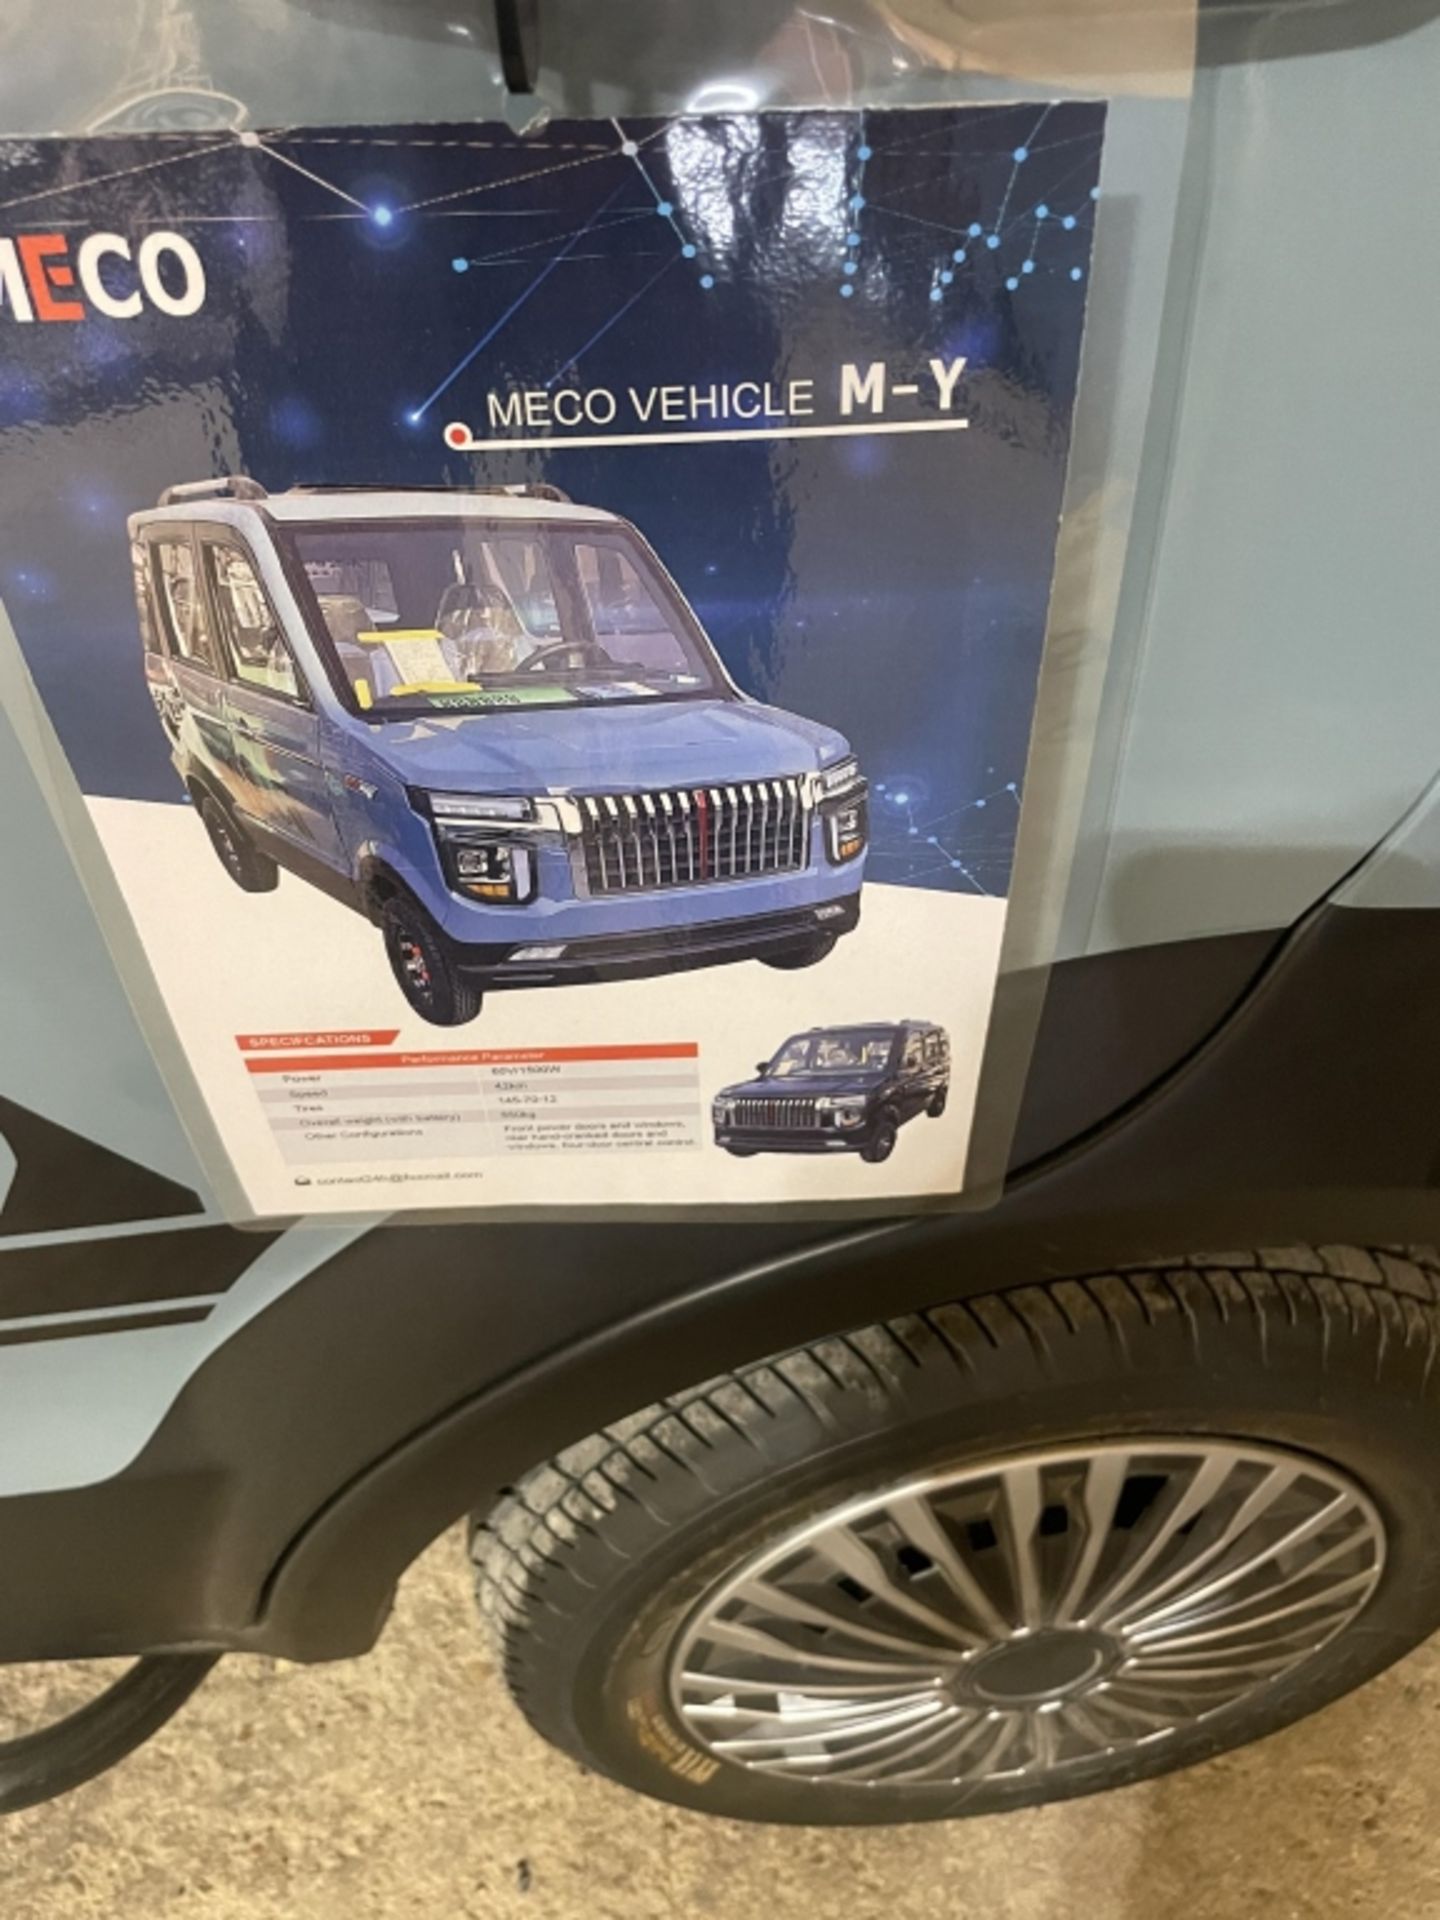 MECO M-Y Electric Vehicle - Image 25 of 25